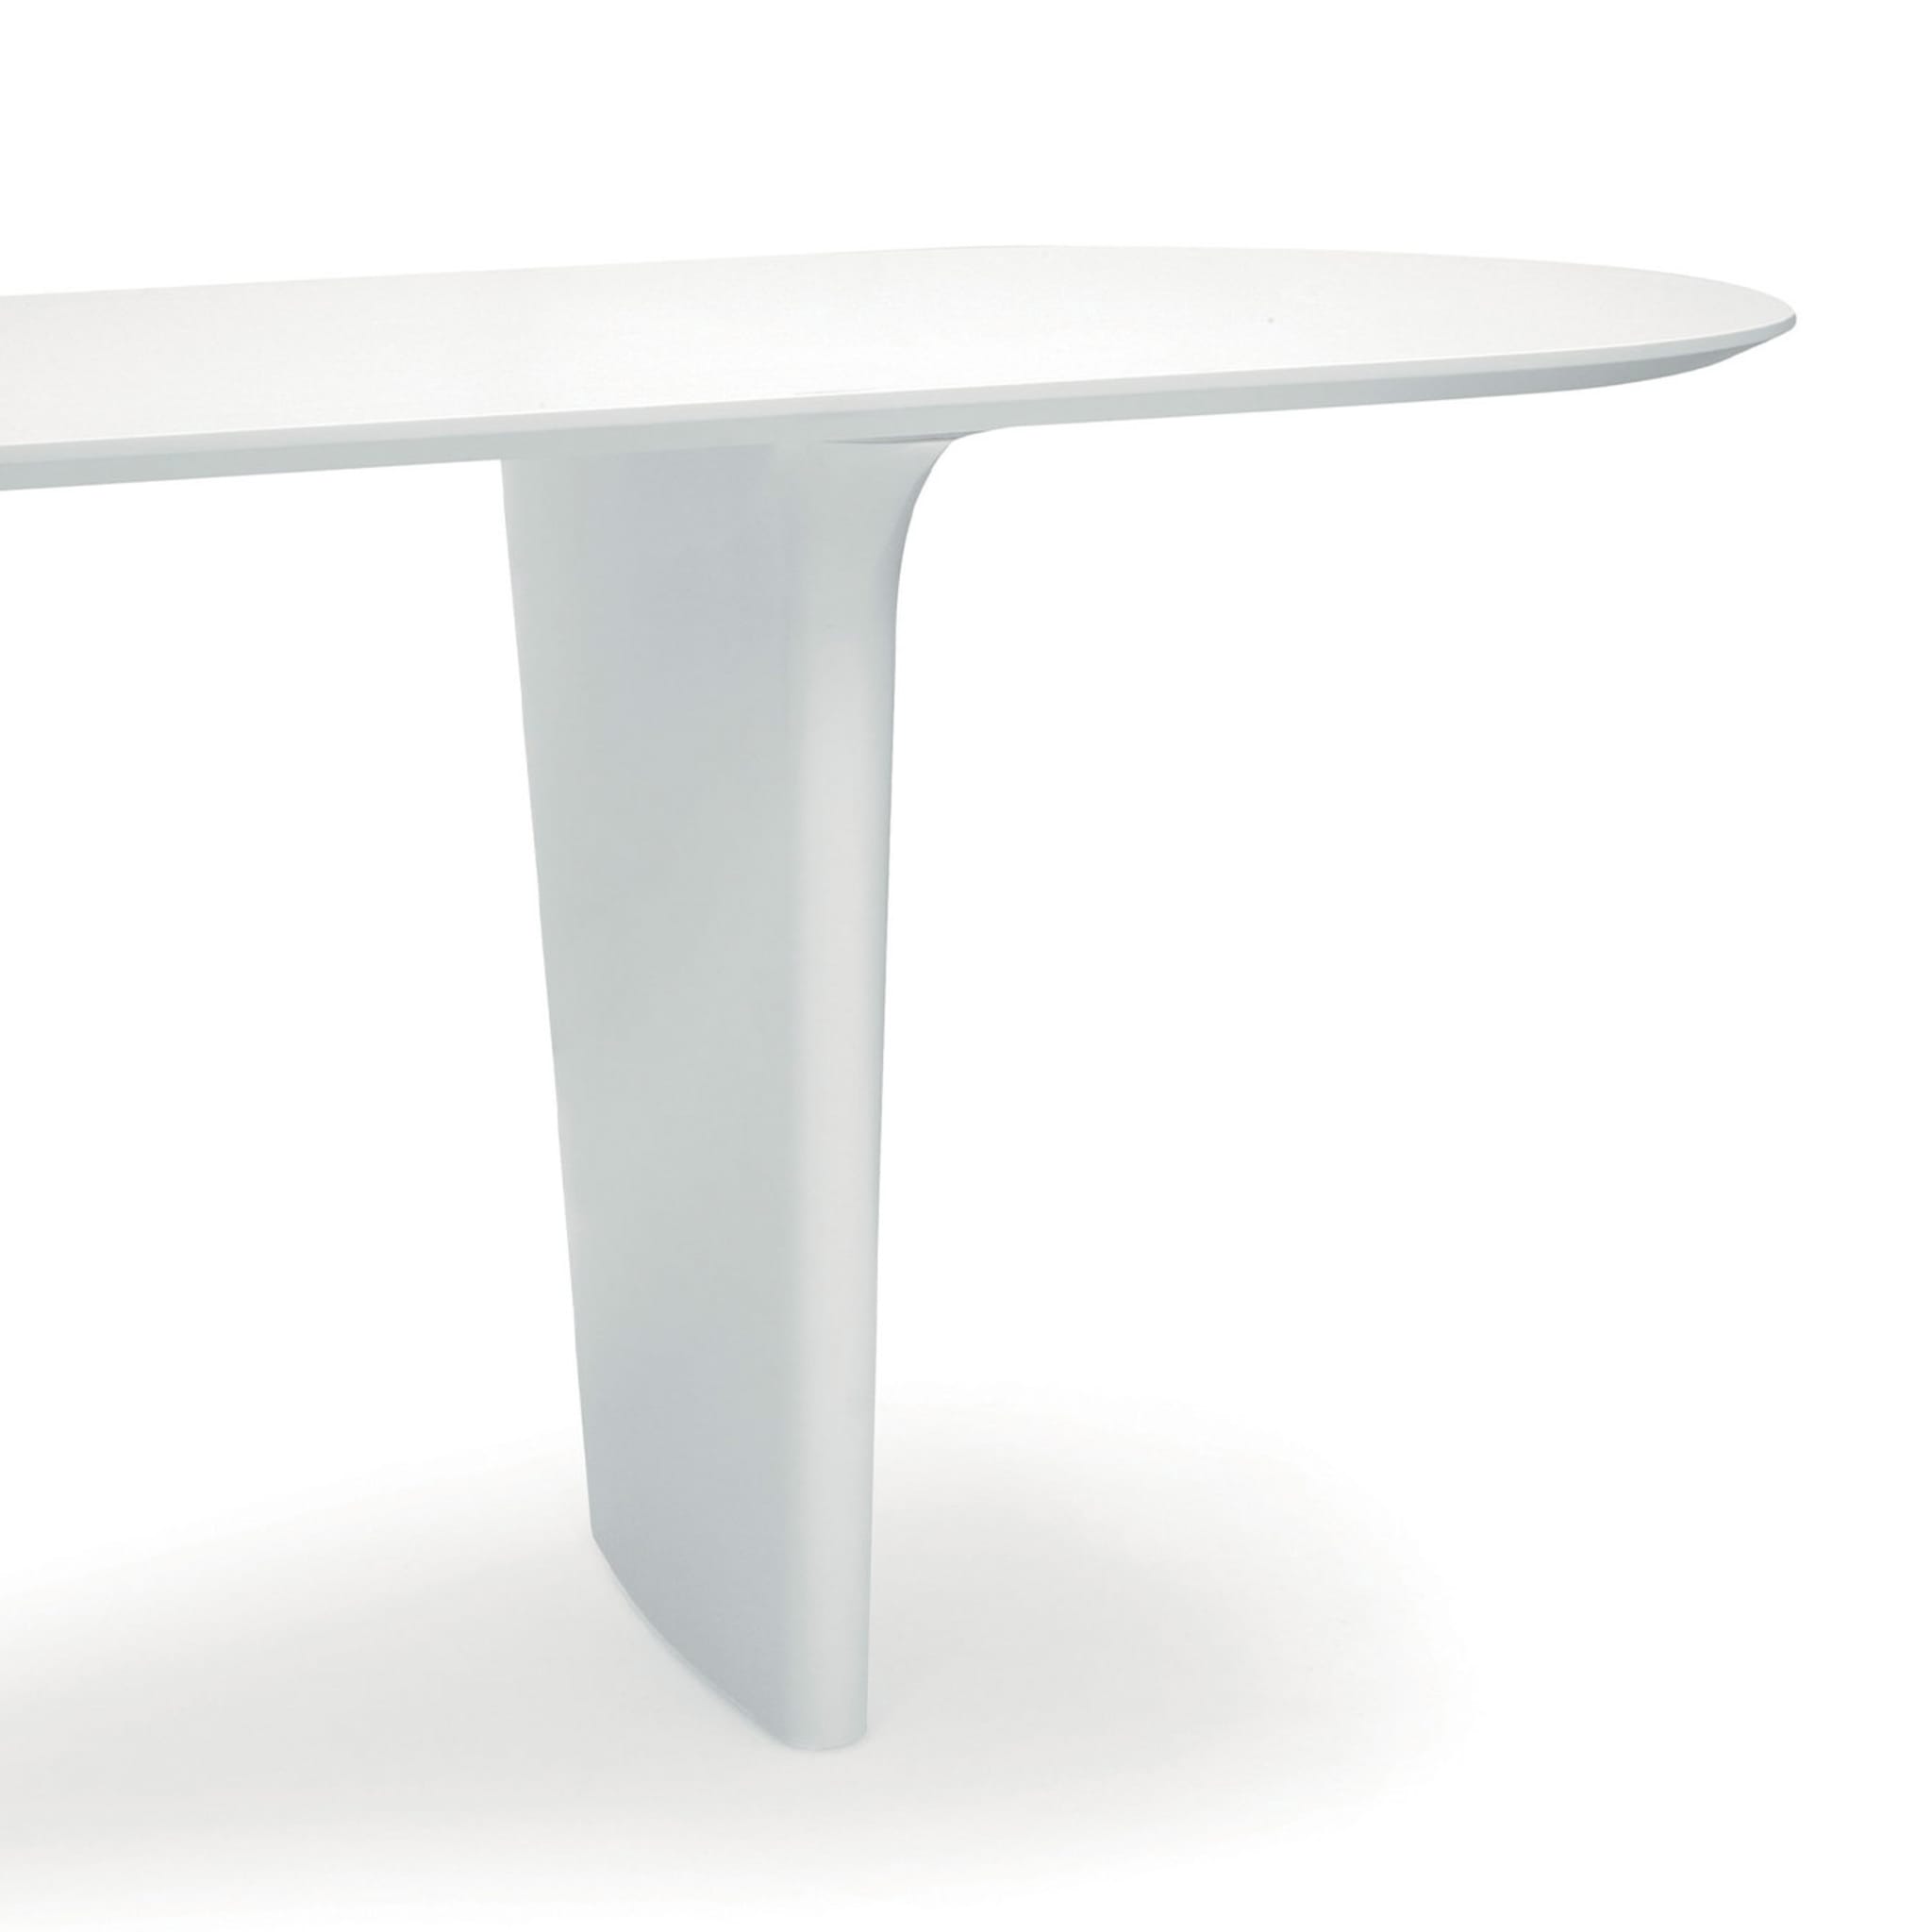 Shift White Desk by Foster + Partners - Alternative view 2